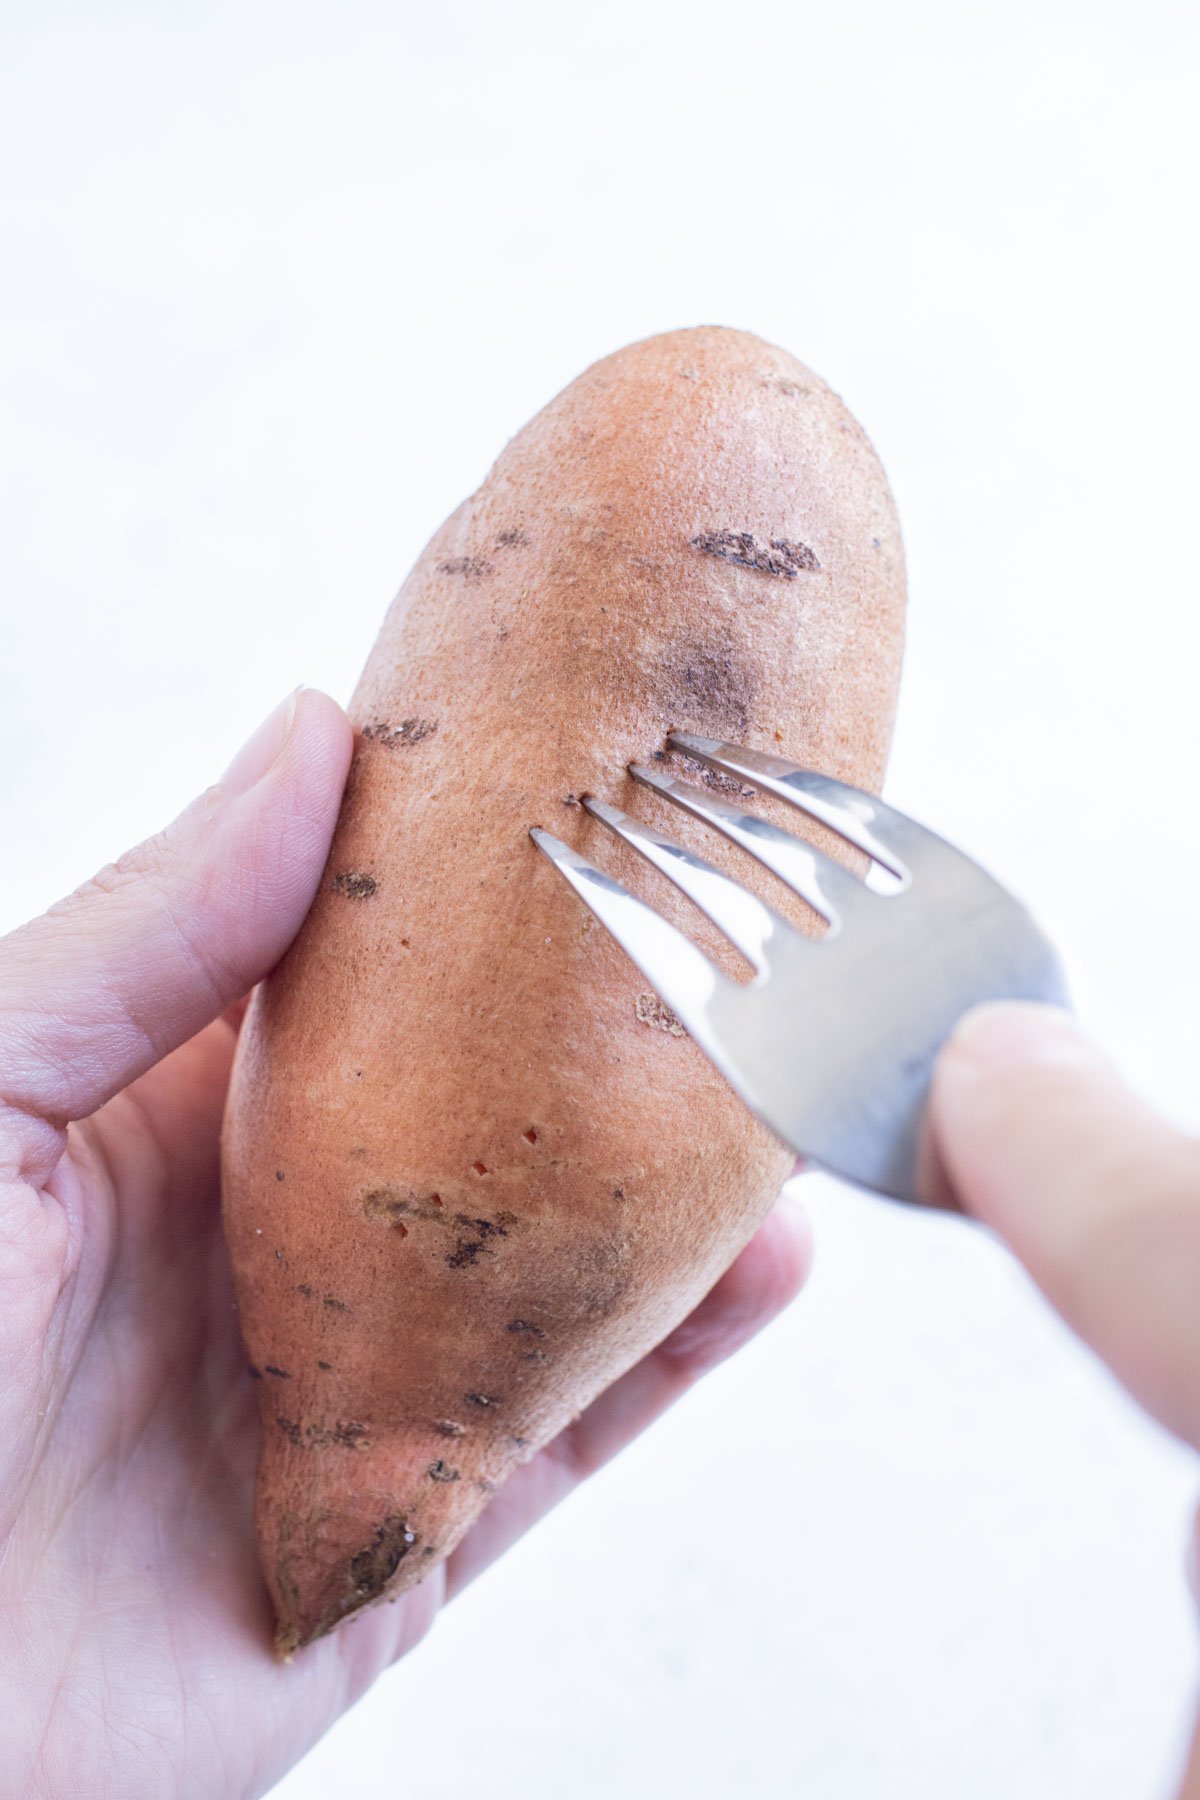 A fork pokes the skin of the sweet potato.